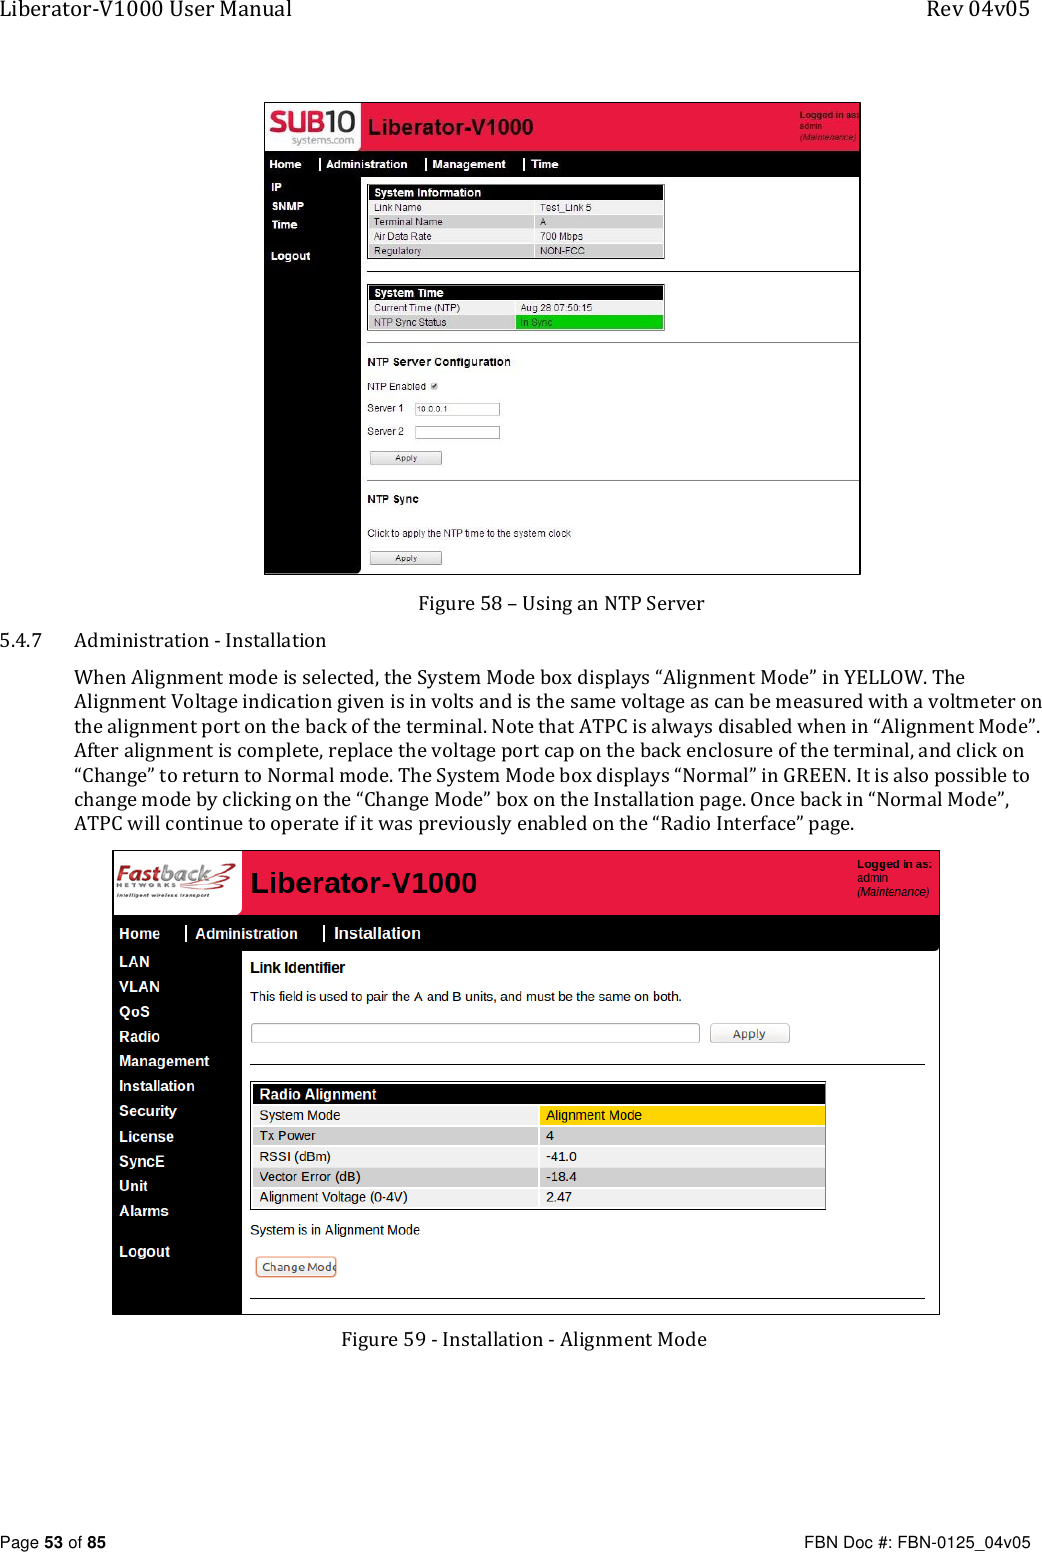 Liberator-V1000 User Manual  Rev 04v05     Page 53 of 85   FBN Doc #: FBN-0125_04v05  Figure 58 – Using an NTP Server 5.4.7 Administration - Installation When Alignment mode is selected, the System Mode box displays “Alignment Mode” in YELLOW. The Alignment Voltage indication given is in volts and is the same voltage as can be measured with a voltmeter on the alignment port on the back of the terminal. Note that ATPC is always disabled when in “Alignment Mode”. After alignment is complete, replace the voltage port cap on the back enclosure of the terminal, and click on “Change” to return to Normal mode. The System Mode box displays “Normal” in GREEN. It is also possible to change mode by clicking on the “Change Mode” box on the Installation page. Once back in “Normal Mode”, ATPC will continue to operate if it was previously enabled on the “Radio Interface” page.  Figure 59 - Installation - Alignment Mode  